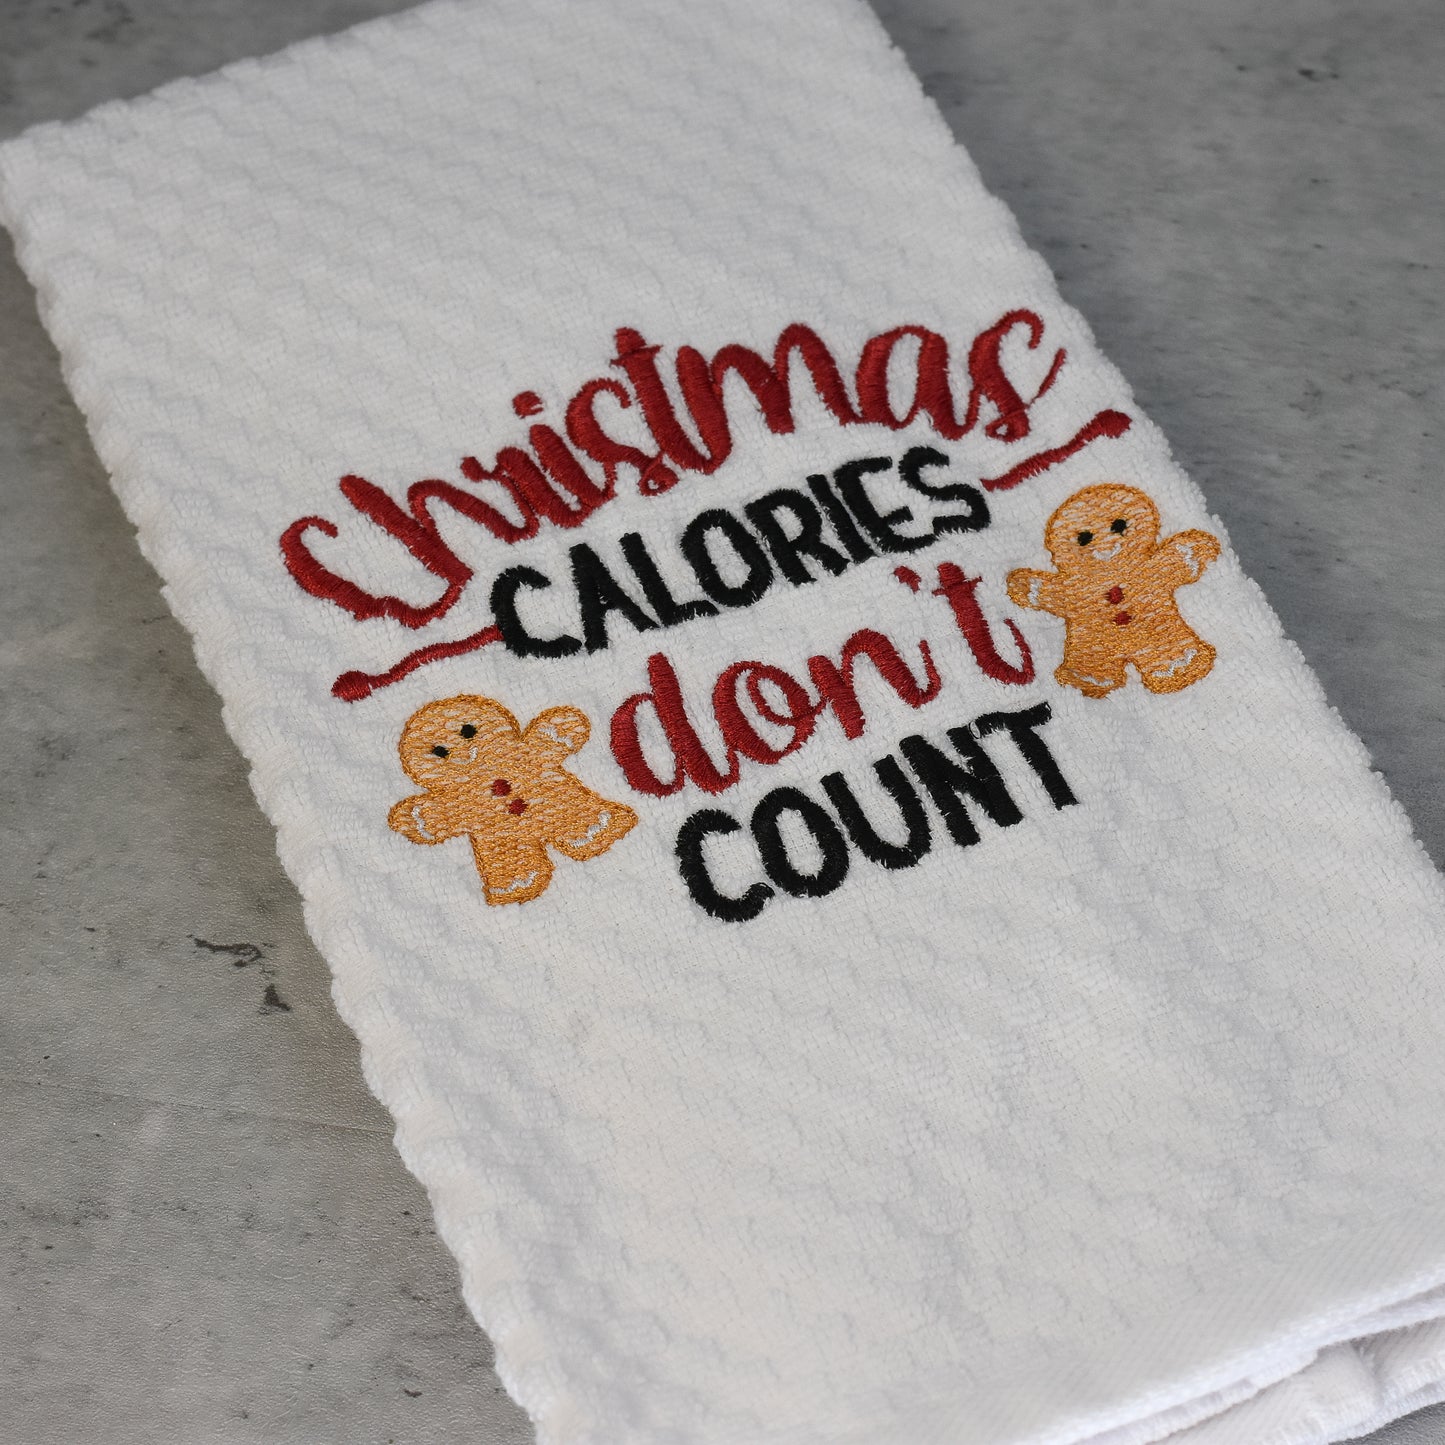 Gingerbread Calories Don't Count Holiday Kitchen Towel - Embroidered